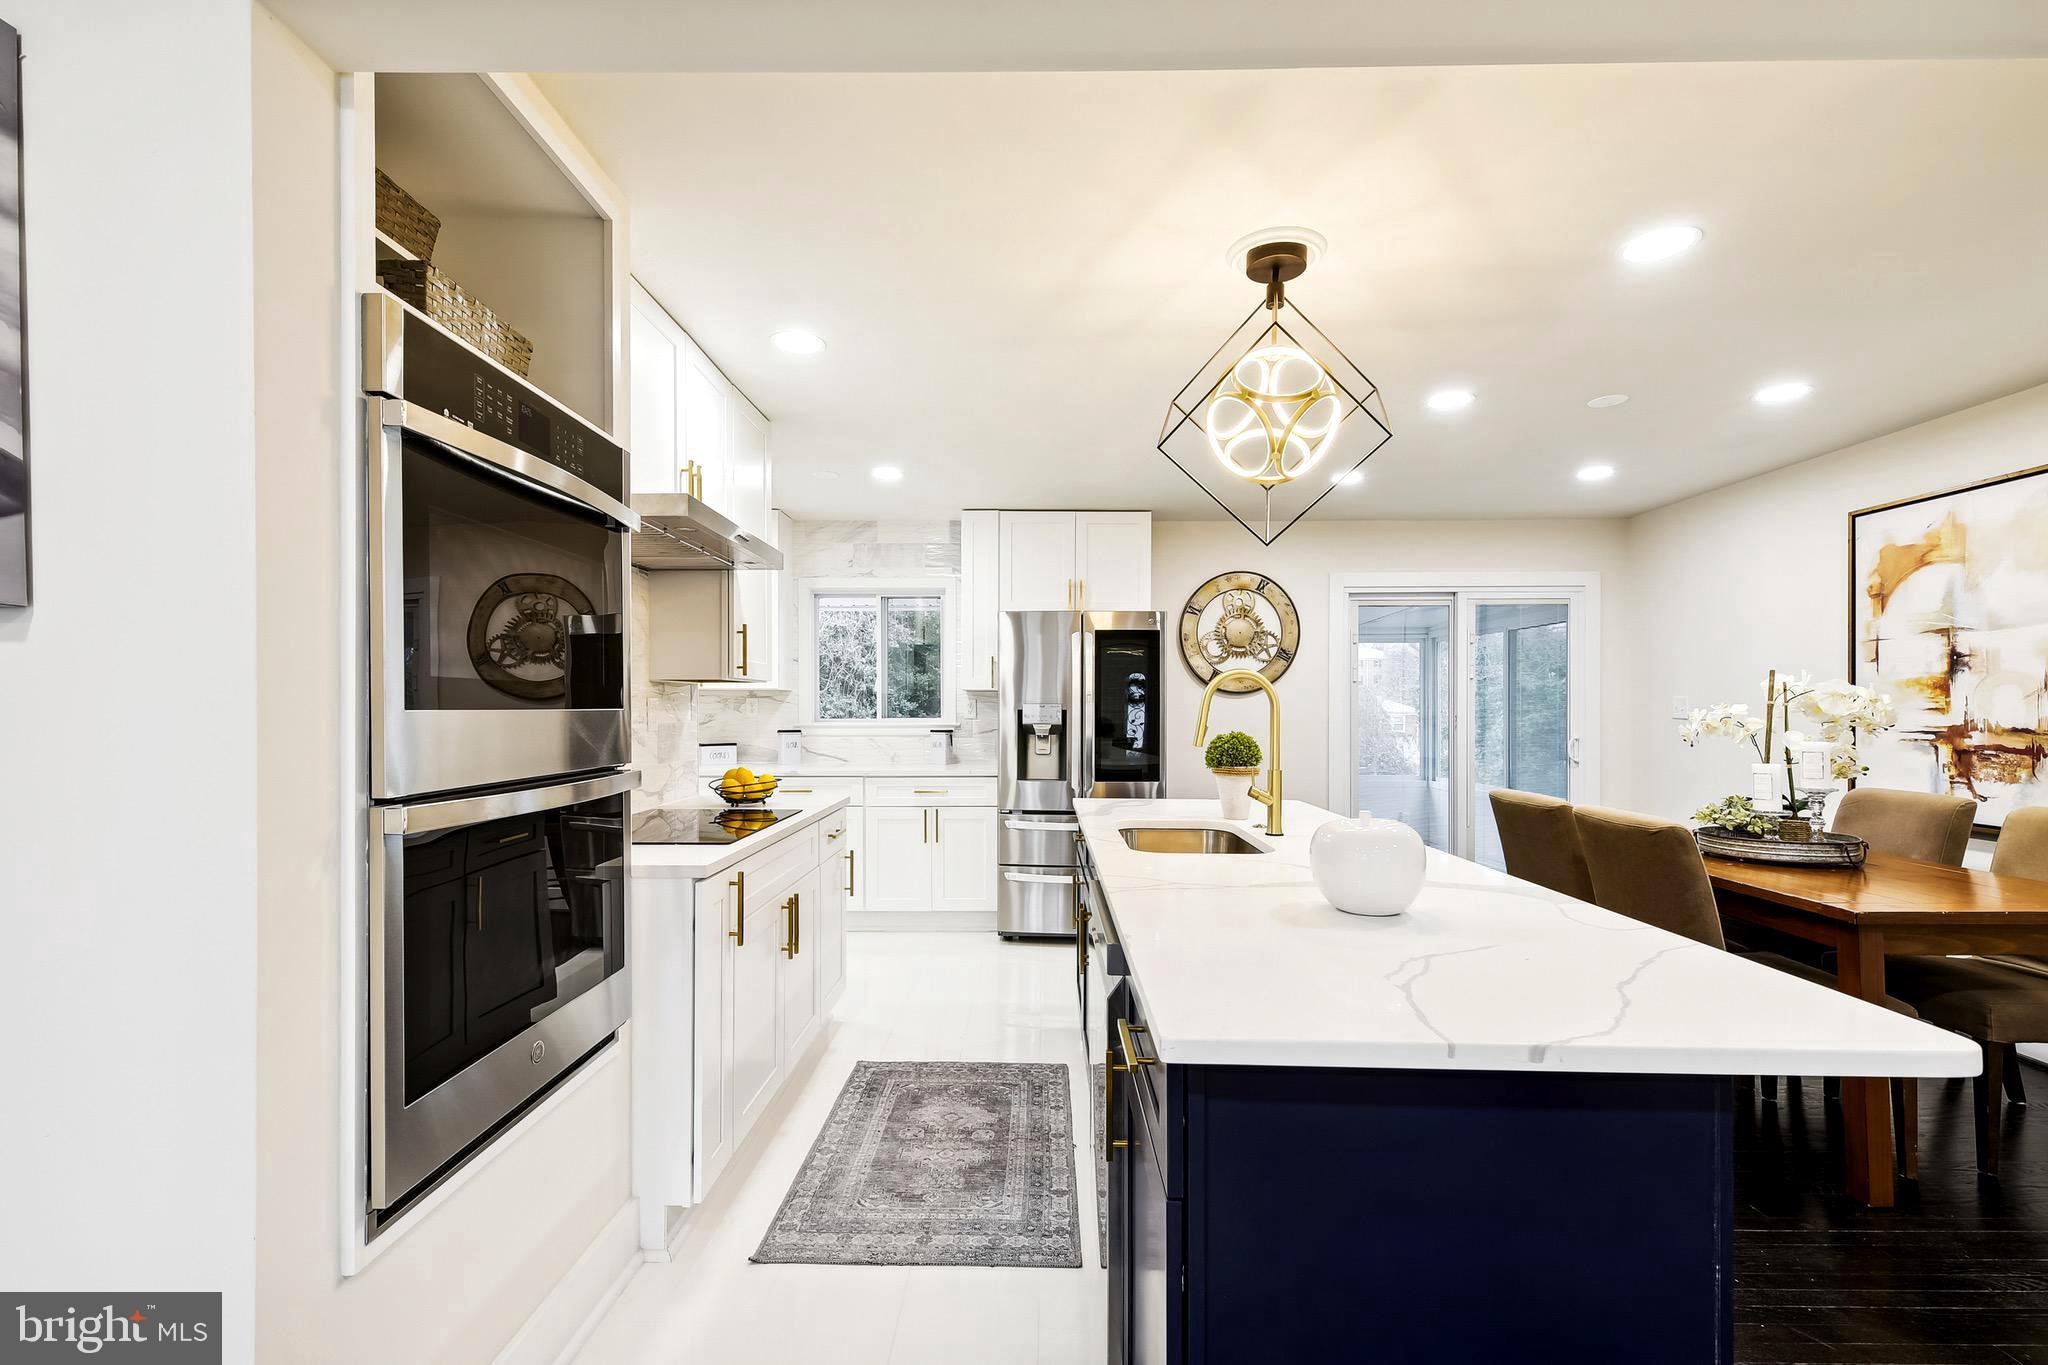 a view of a dining room kitchen island with stainless steel appliances granite countertop a stove top oven